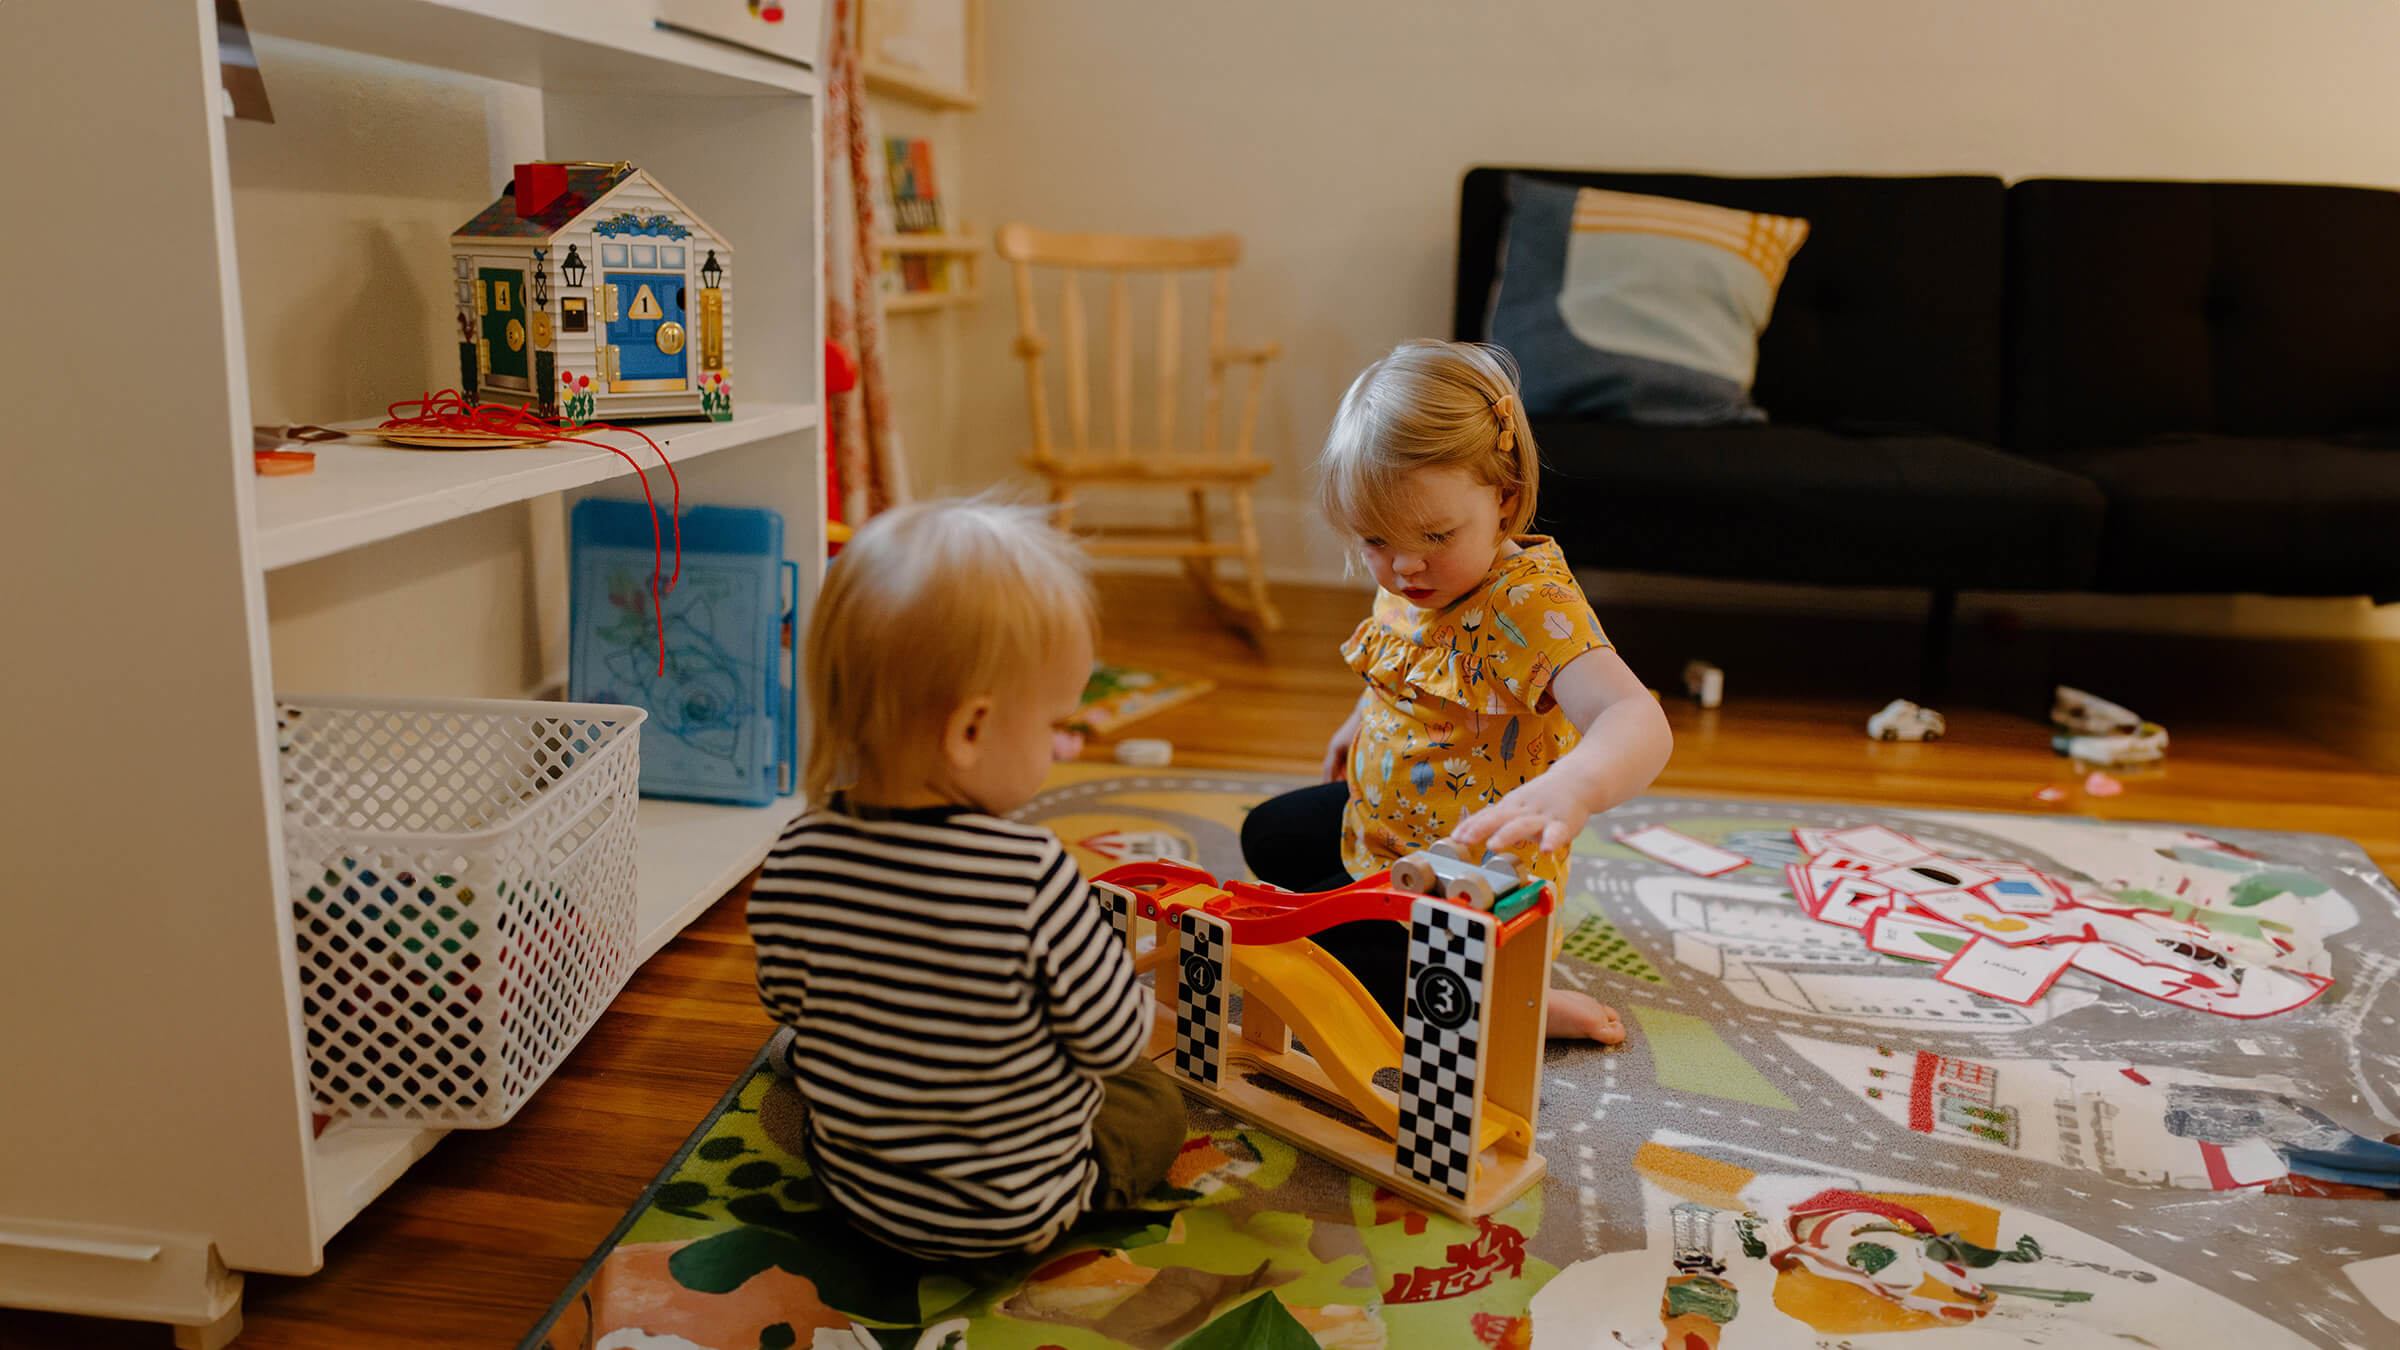 Two toddlers play with toy cars on a colorful mat in a classroom setting.